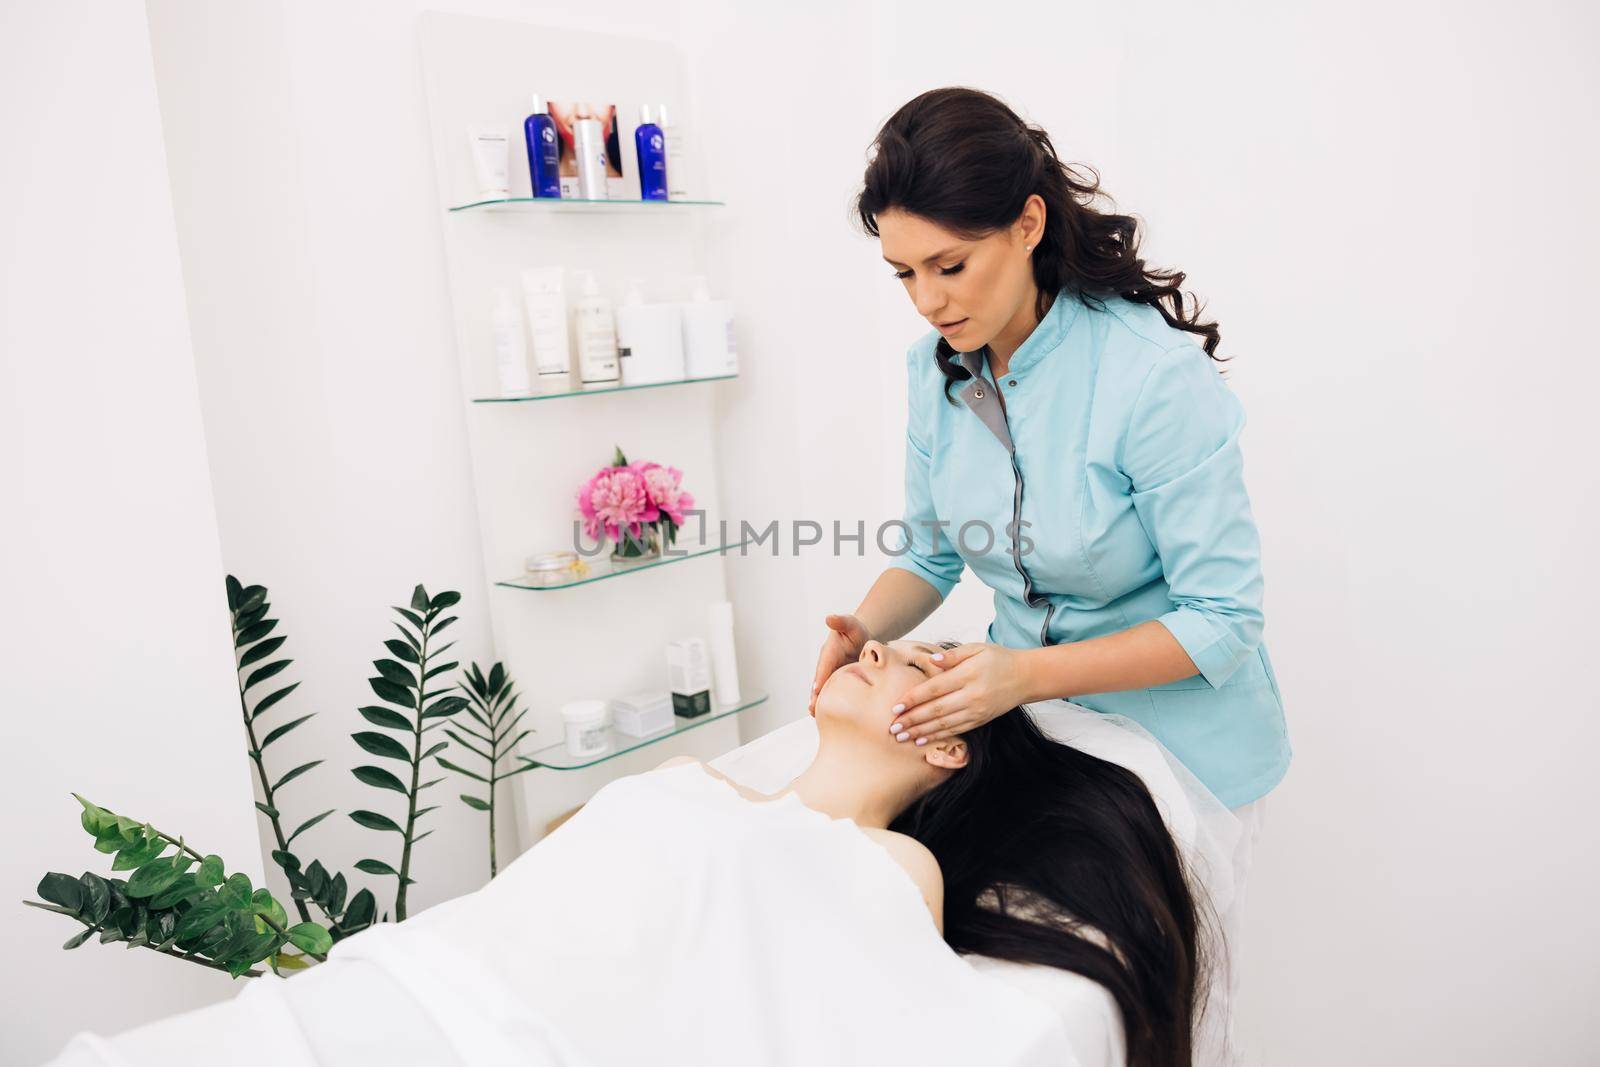 Young woman having massage by a female masseur in blue medical pijama at modern health center. Wellness health concept. Woman relaxing during massage lying on massage table.